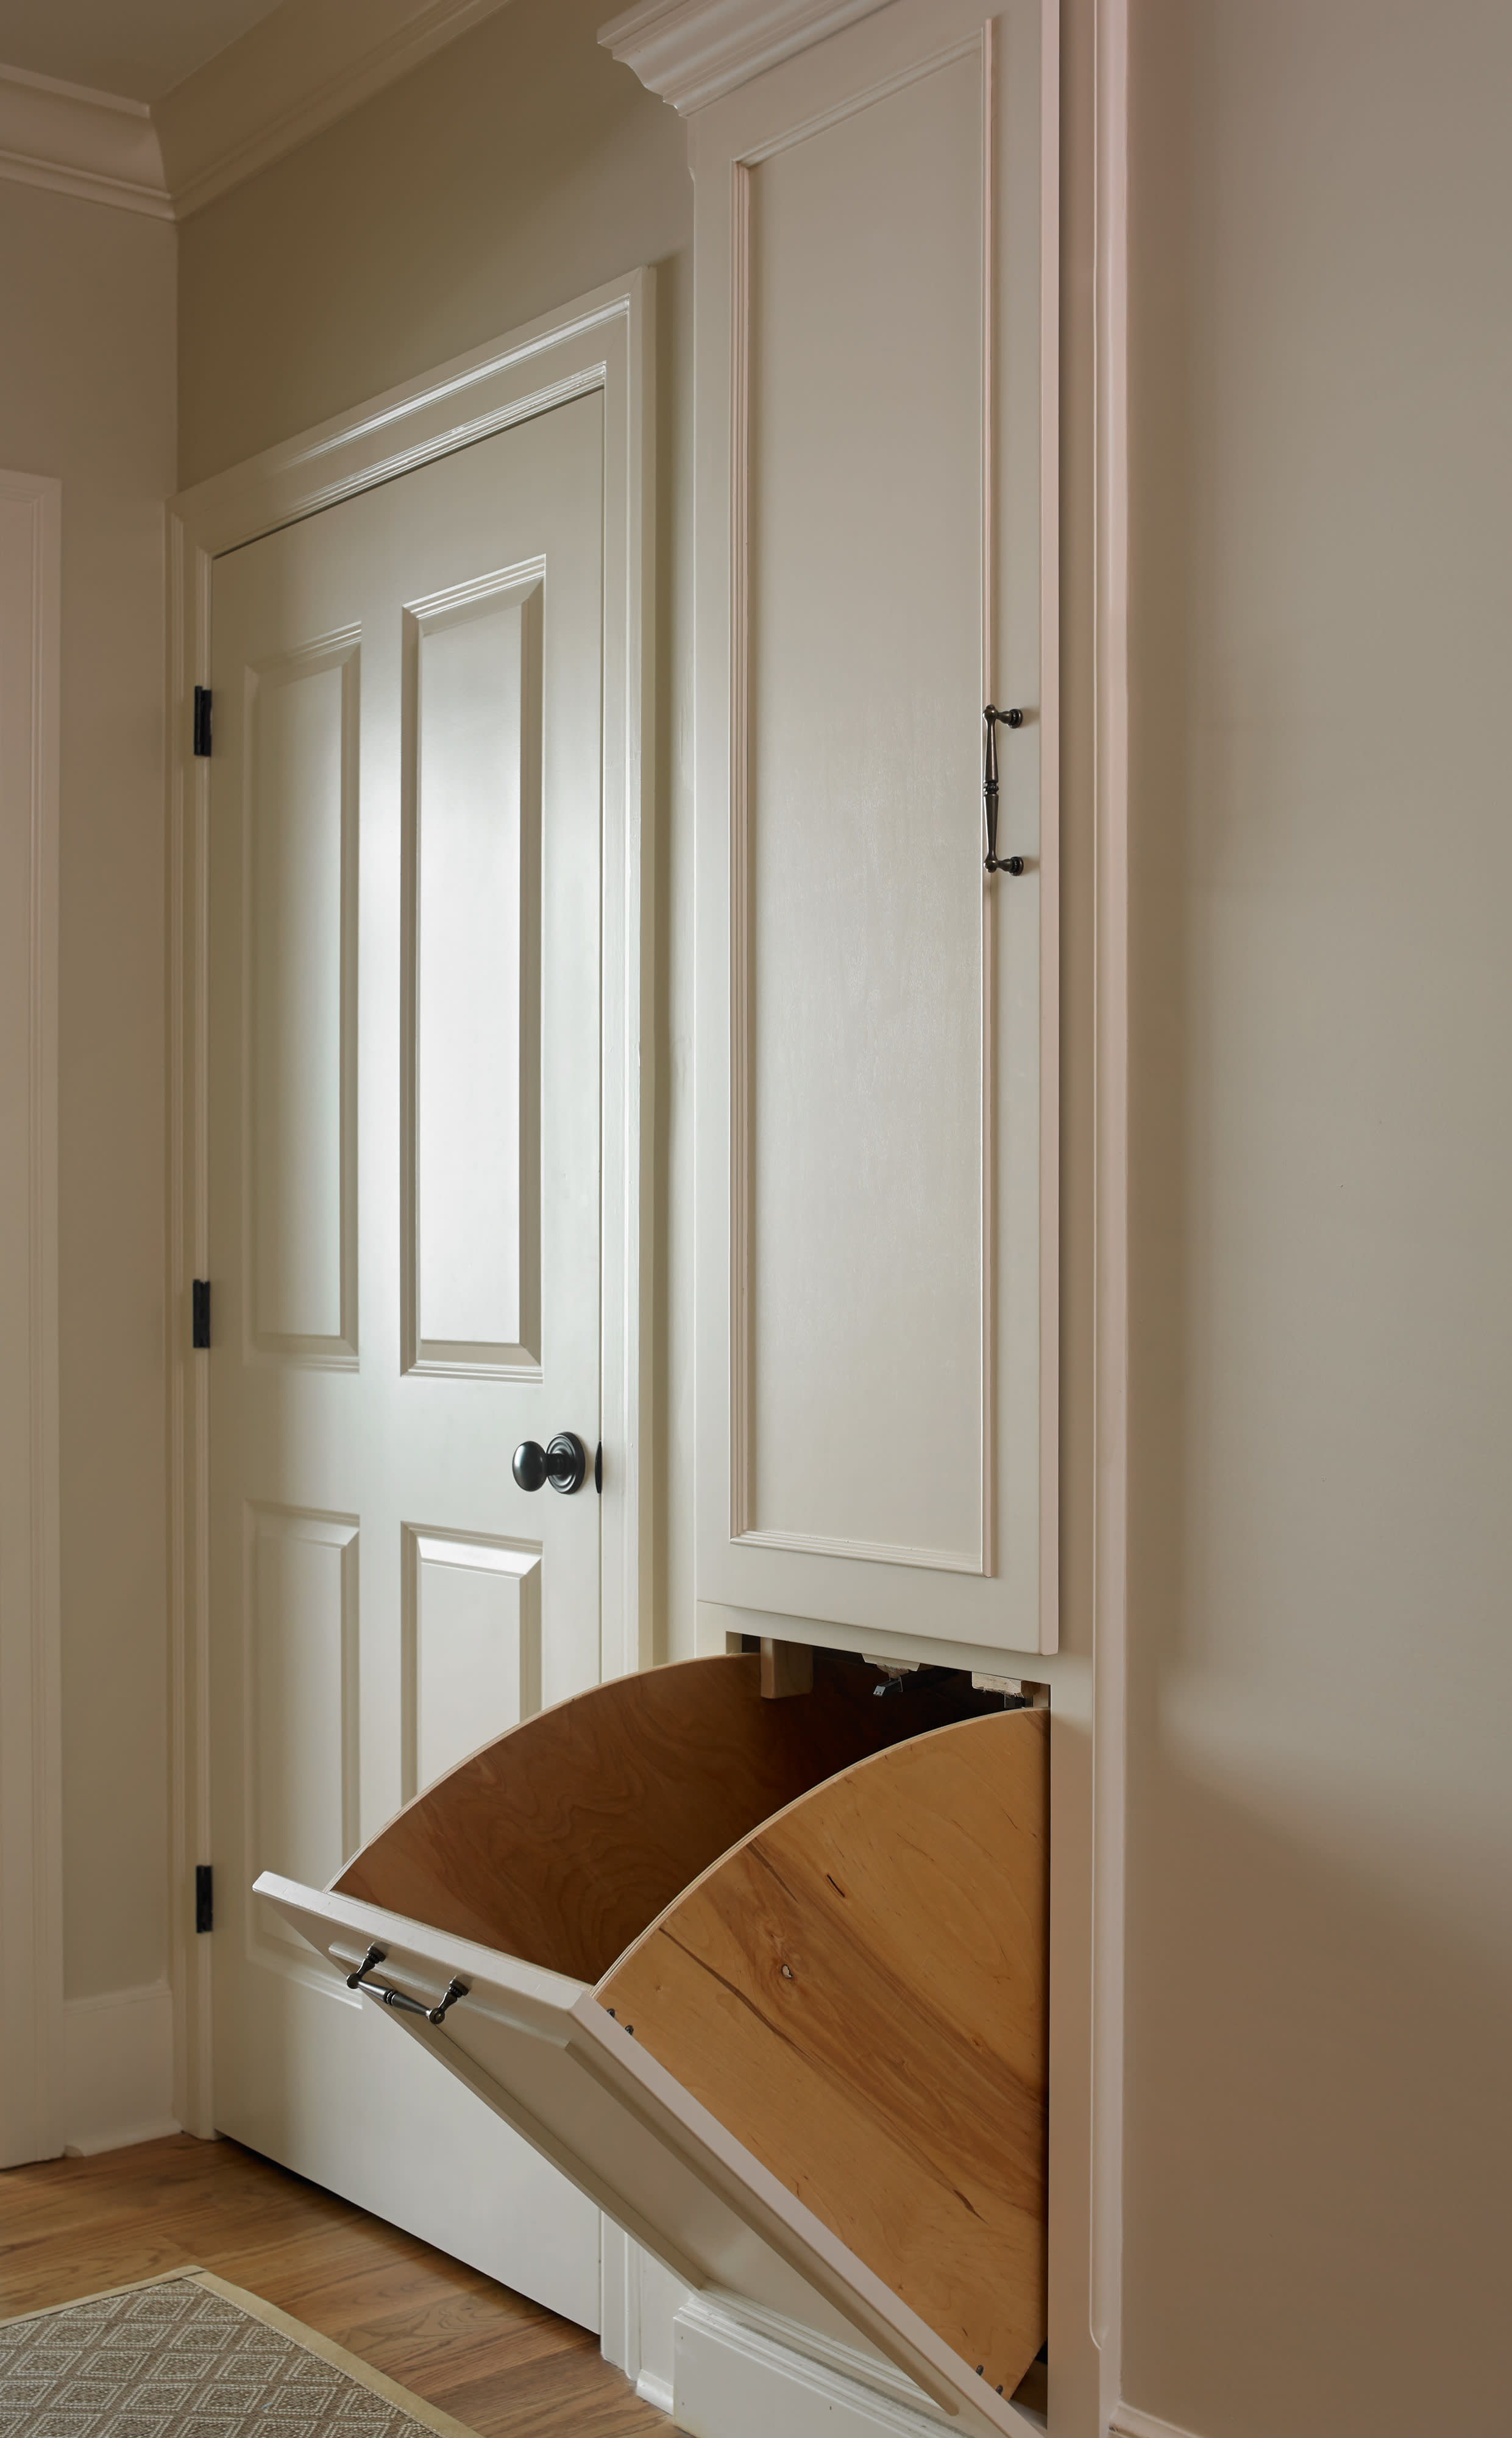 Laundry Chute Photos + Tips Before You Install One